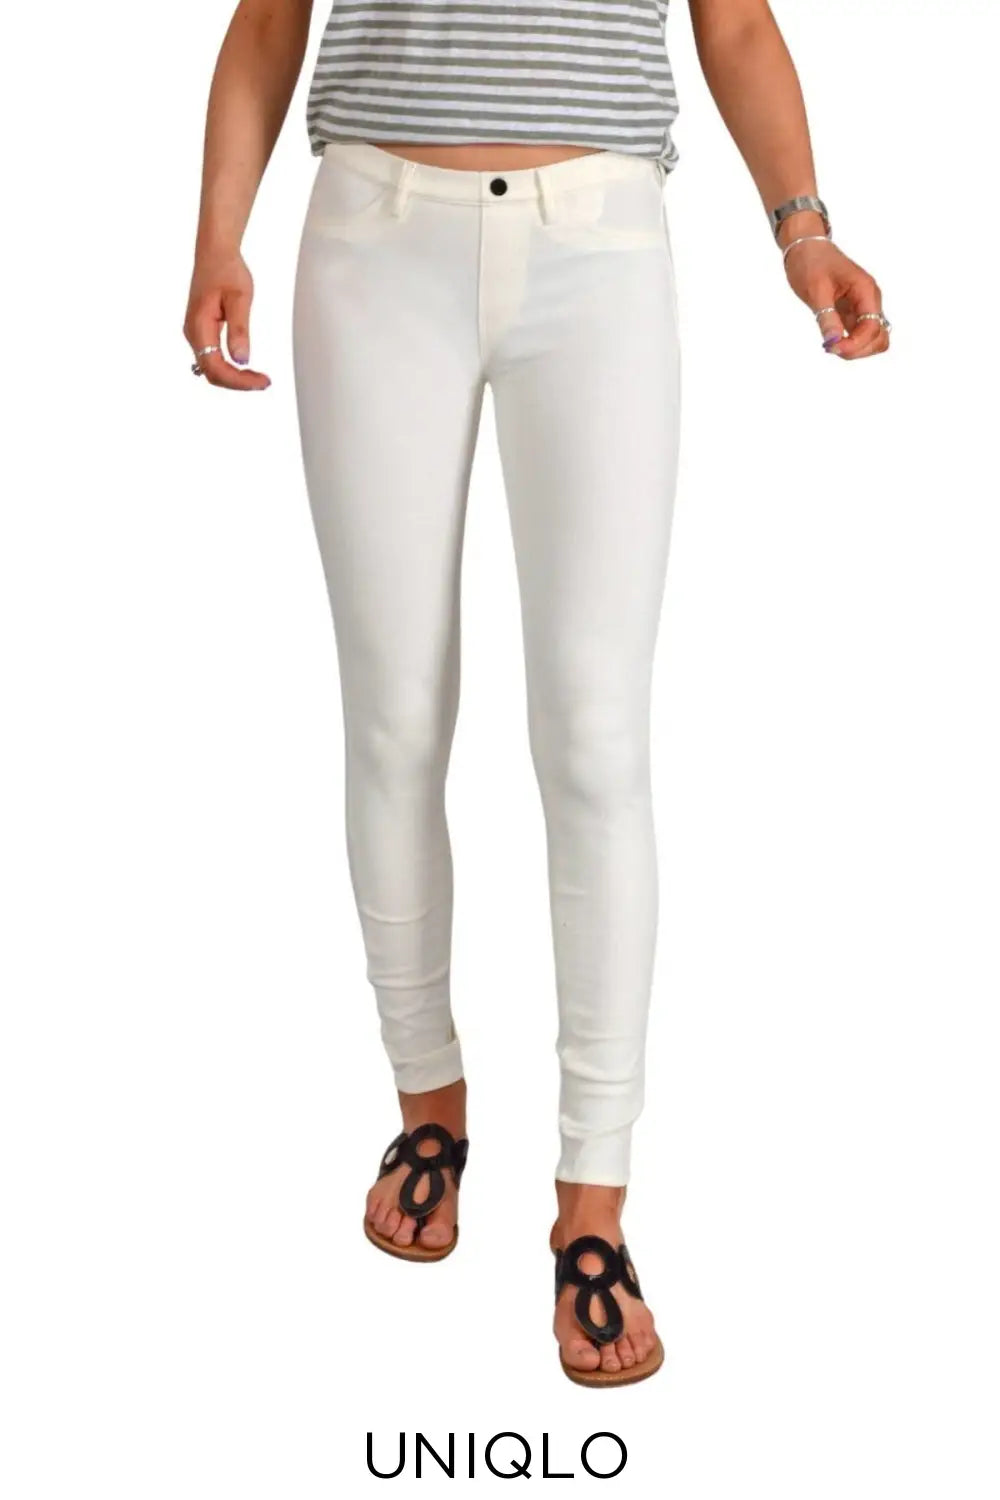 Uniqlo Soft Touch Jeggings Ivory / S (Size 4)